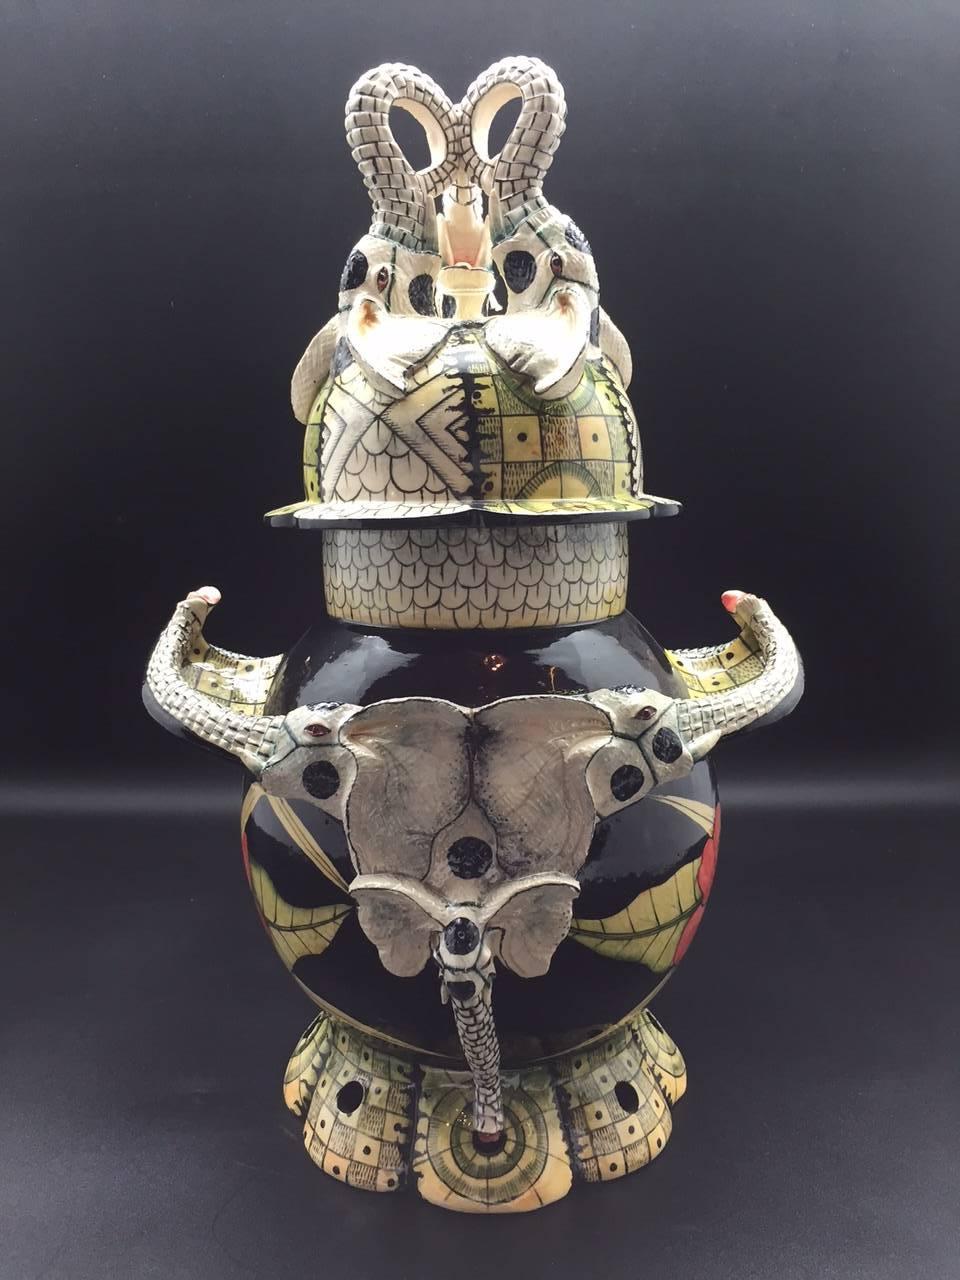 A pair of elephant tureen ceramic sculpture by Ardmore from South Africa. Sculpted by Sabelo Khoza and Qiniso Mungwe, painted by Wiseman Ndlovu. Measures: 9